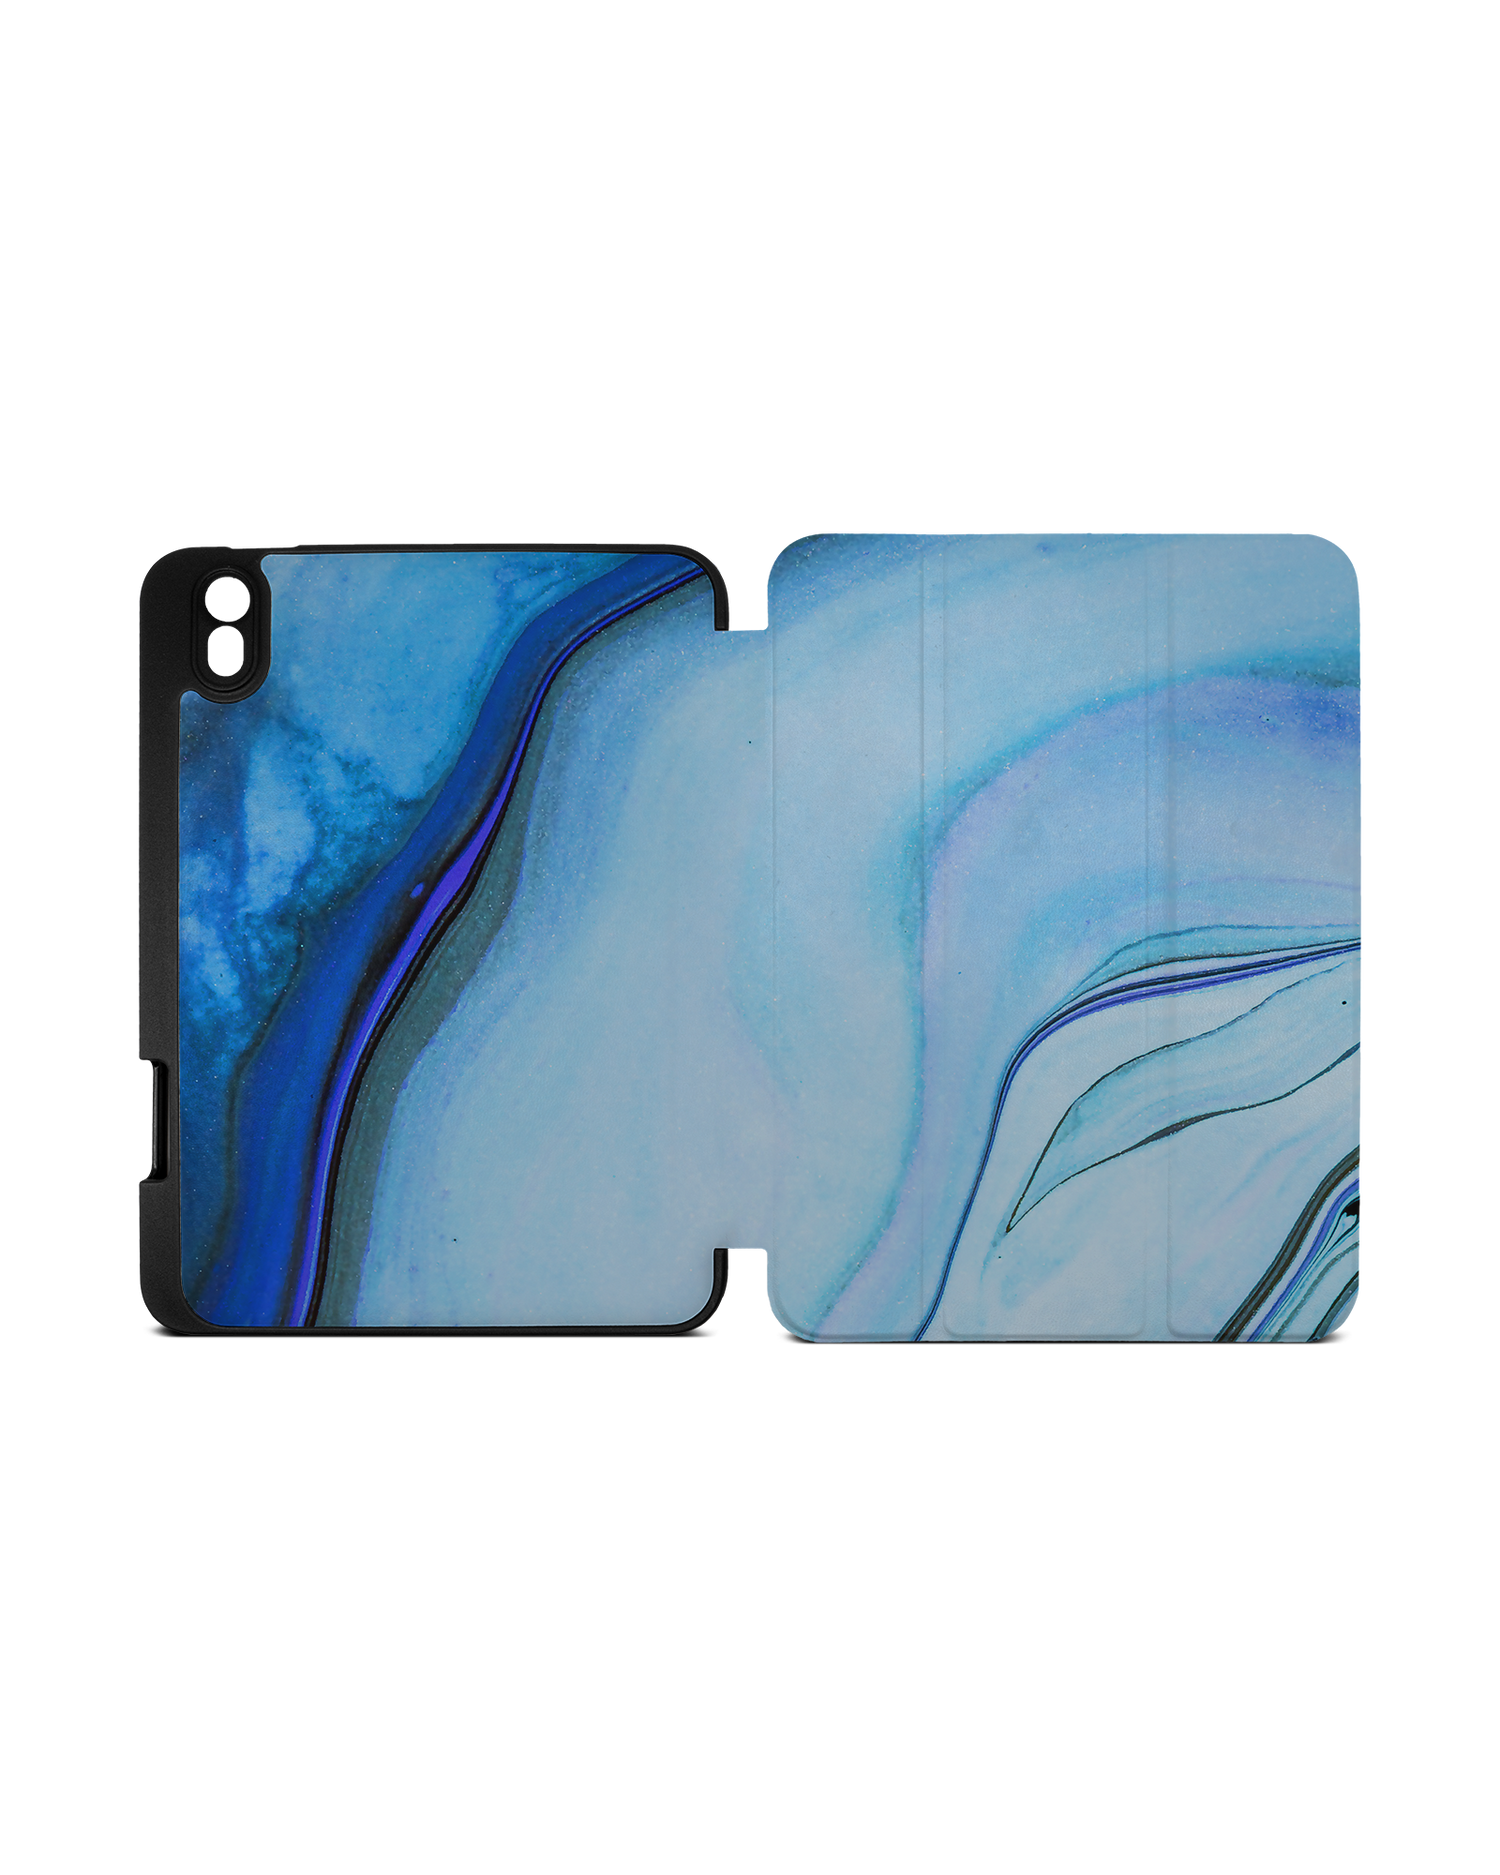 Cool Blues iPad Case with Pencil Holder Apple iPad mini 6 (2021): Opened exterior view